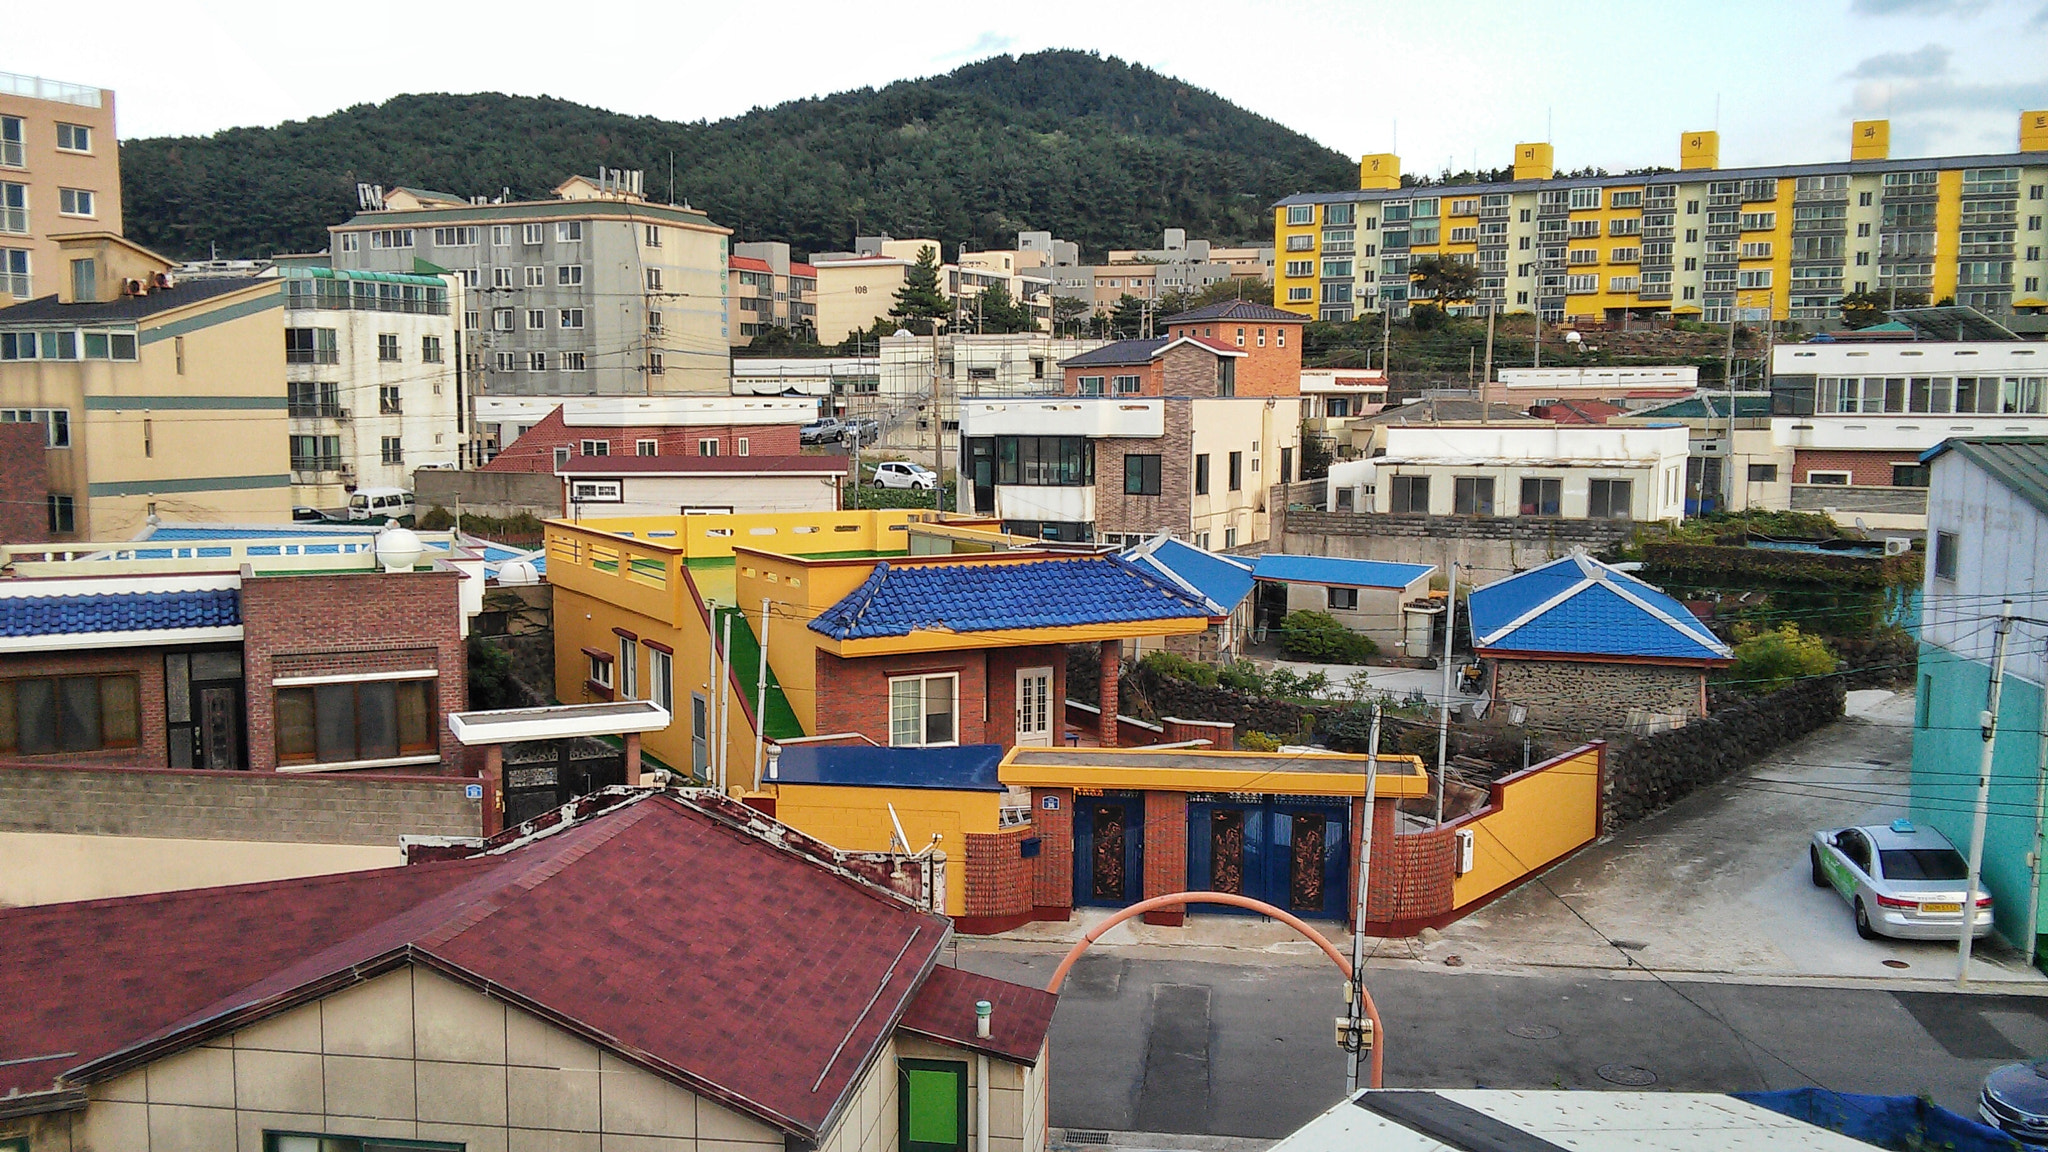 LG G3 Beat sample photo. Colorful rooftops and buildings along the samyang black sand beach, jeju island photography